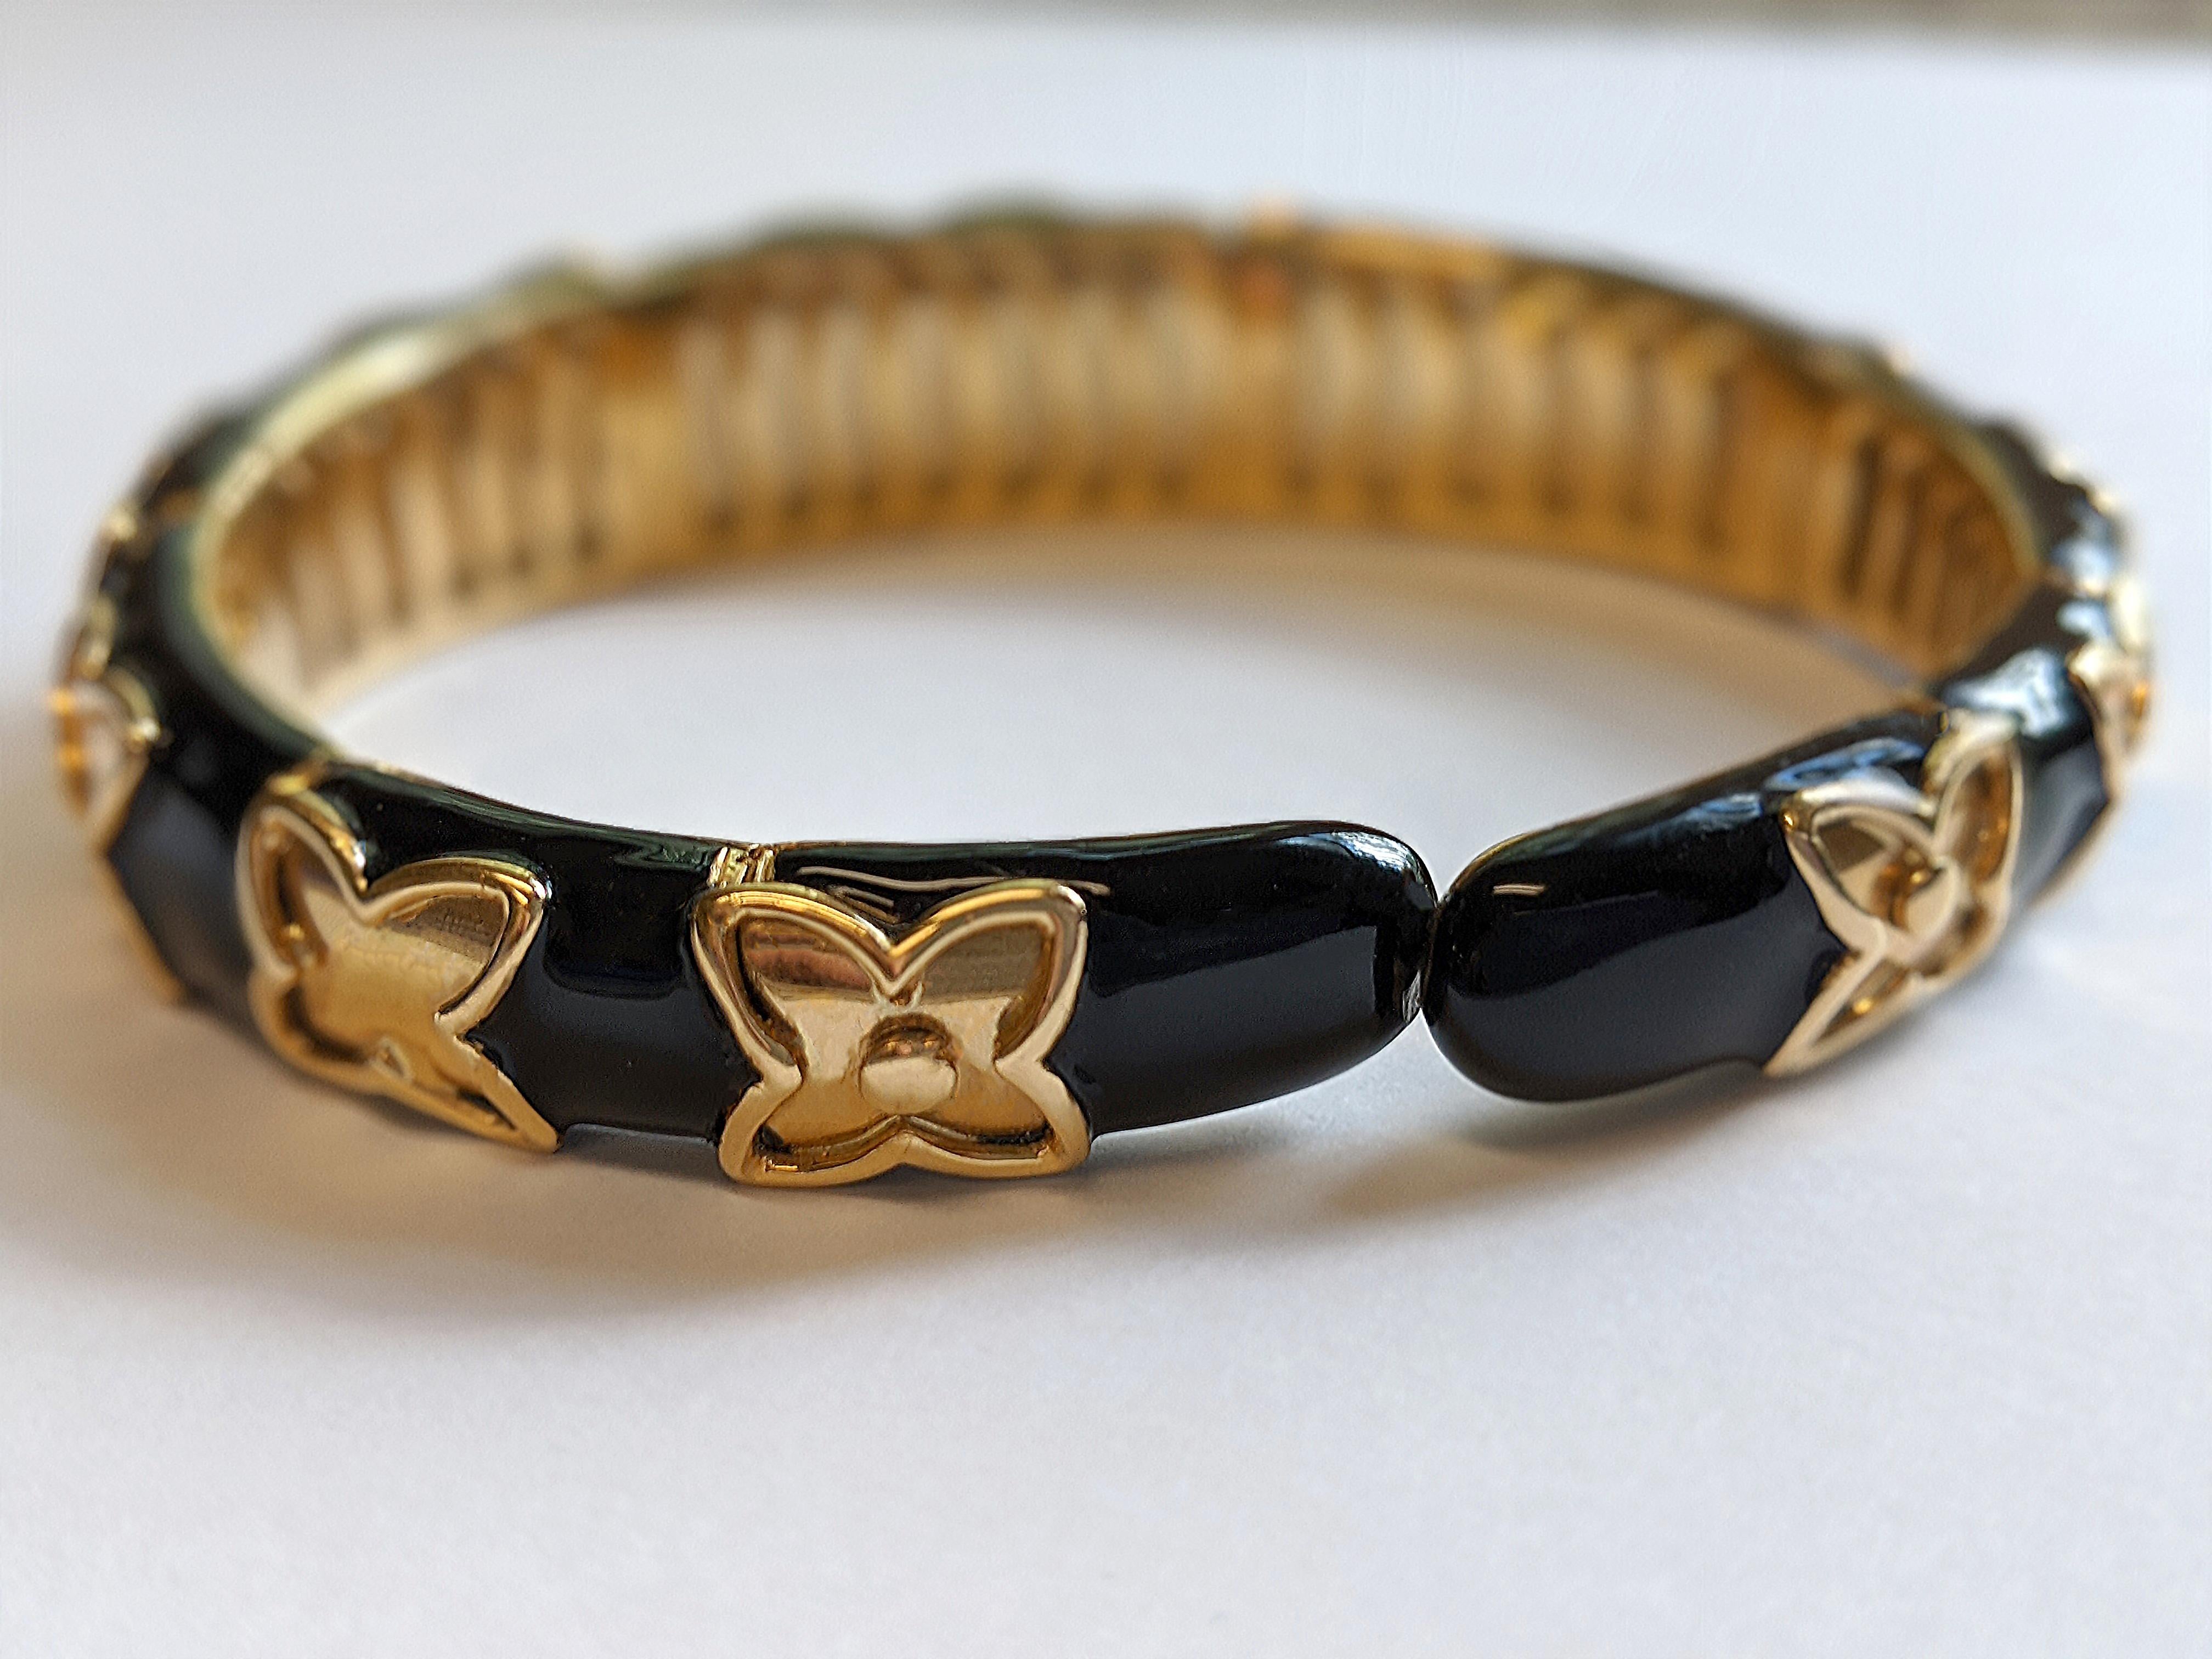 The alternating pattern of black enamel against gleaming 18 K yellow gold is striking in this vintage bangle bracelet. 2.15 carats of white diamonds add sparkle to the quatrefoil motif.

Cut: Round
Quantity: 75
Combined Weight: 2.15 carats
Color: